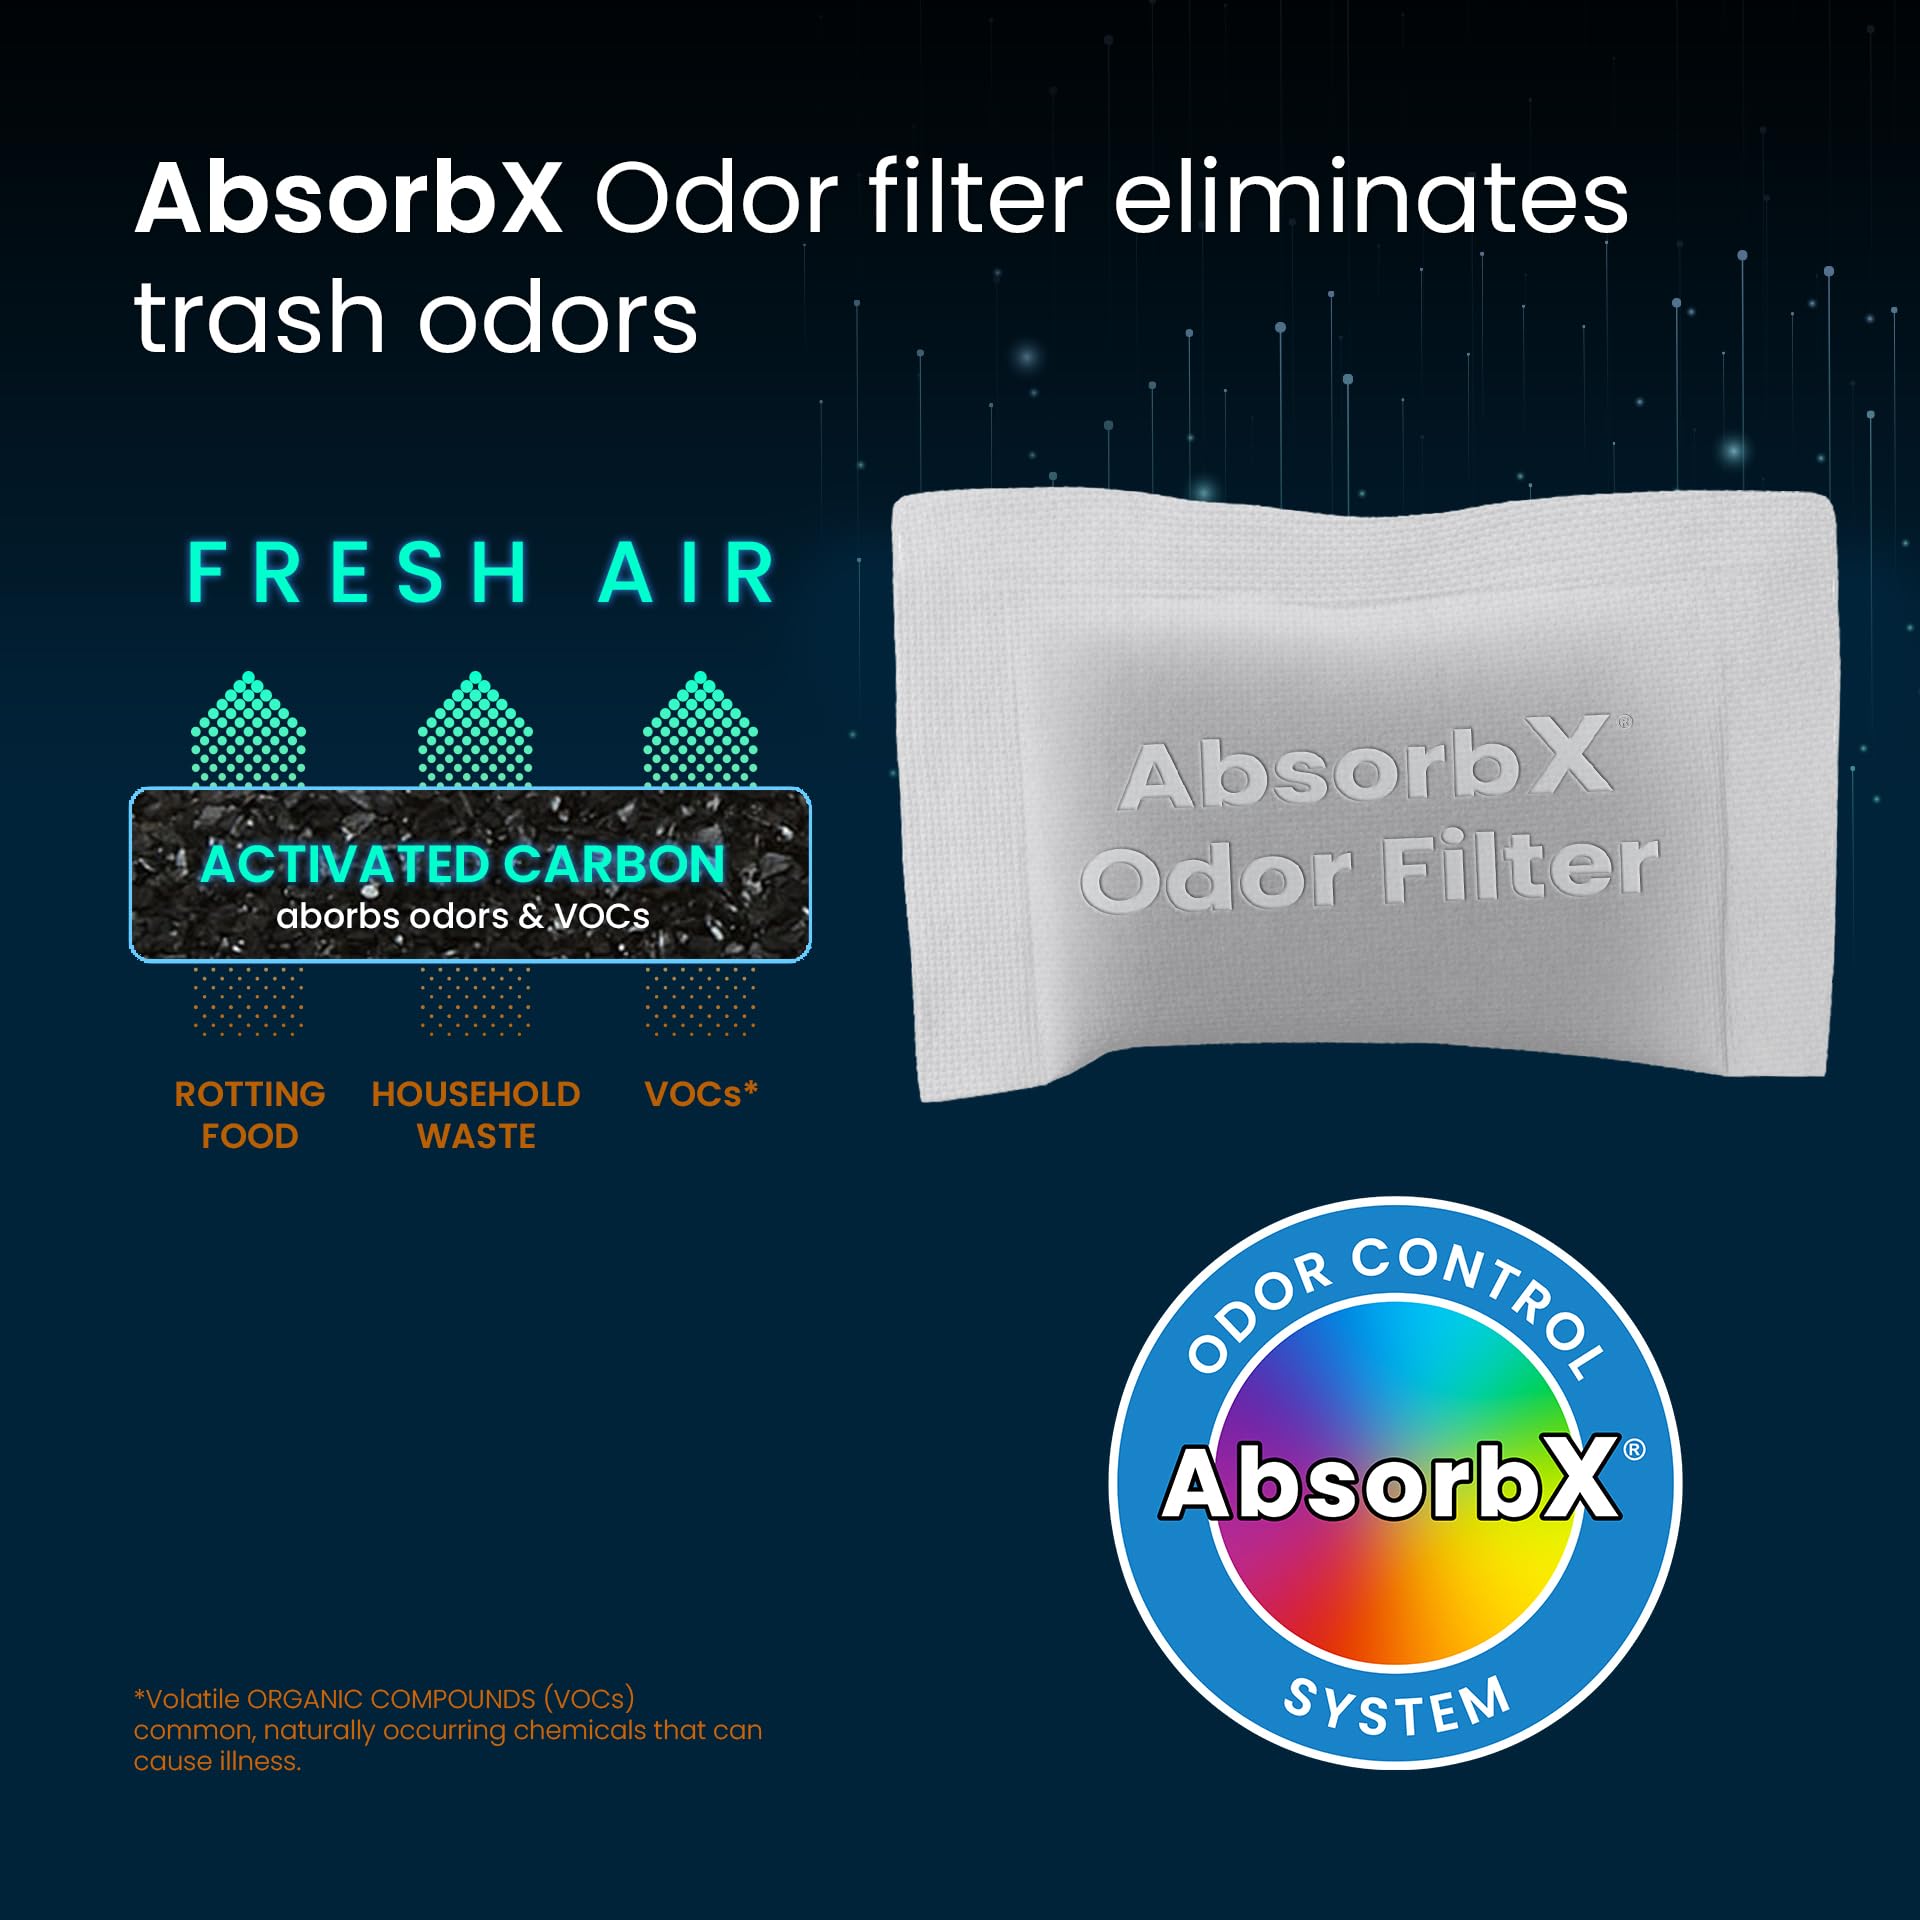 iTouchless 3-Pack AbsorbX Odor Filter Deodorizers, Absorbs Trash Odors, All Natural Activated Carbon, Biodegradable - for 8 Gal and larger Trash Cans with Odor Filter Compartment